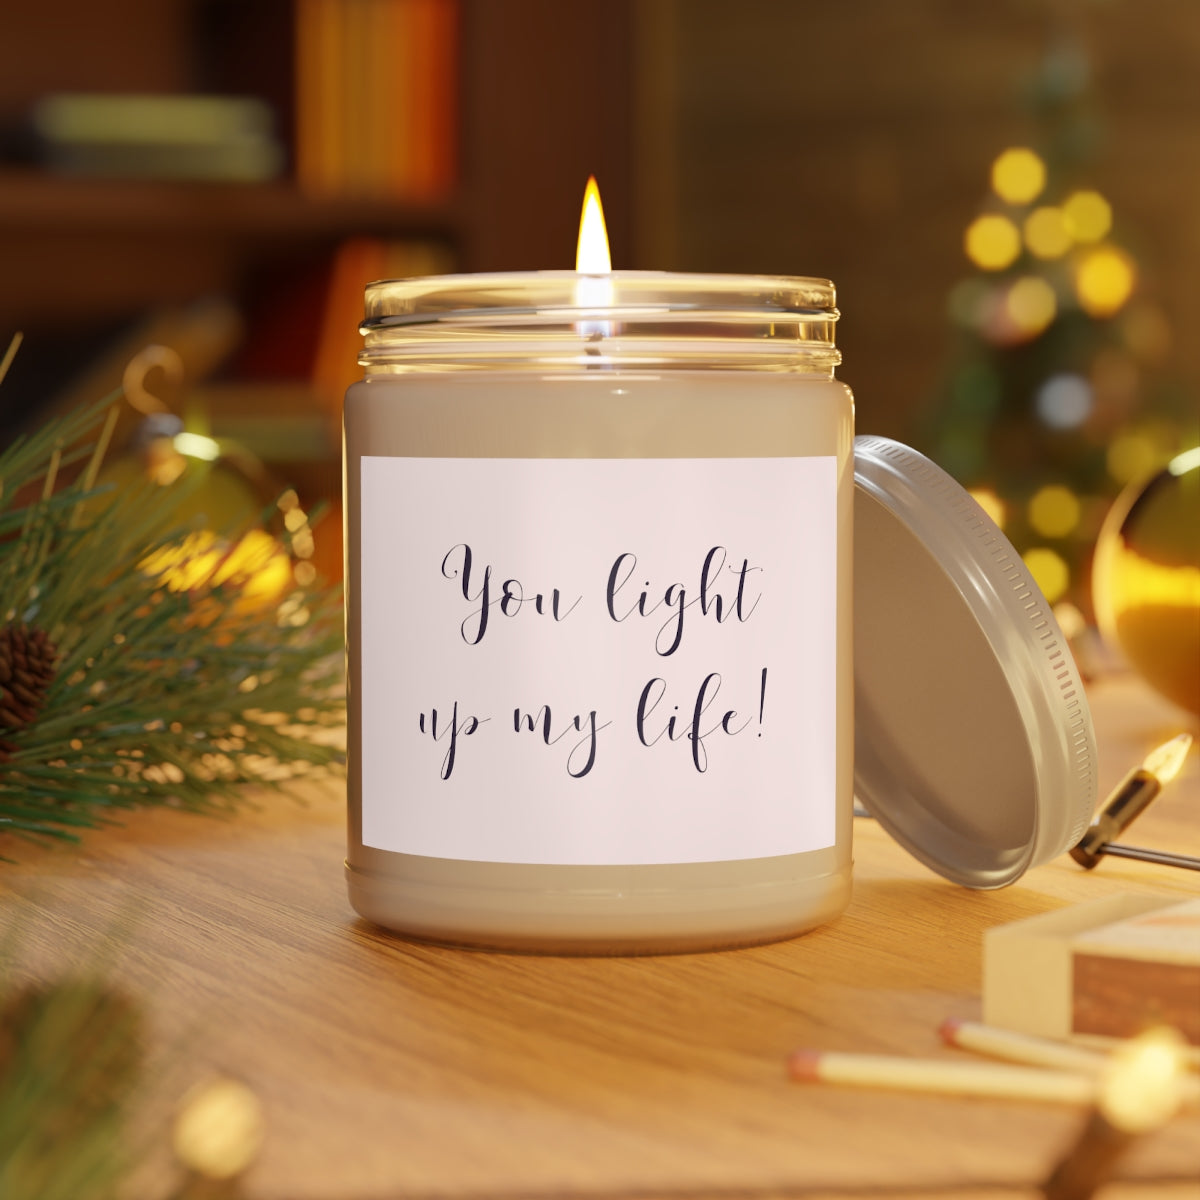 You Light Up My Life! Scented Candles, 9oz